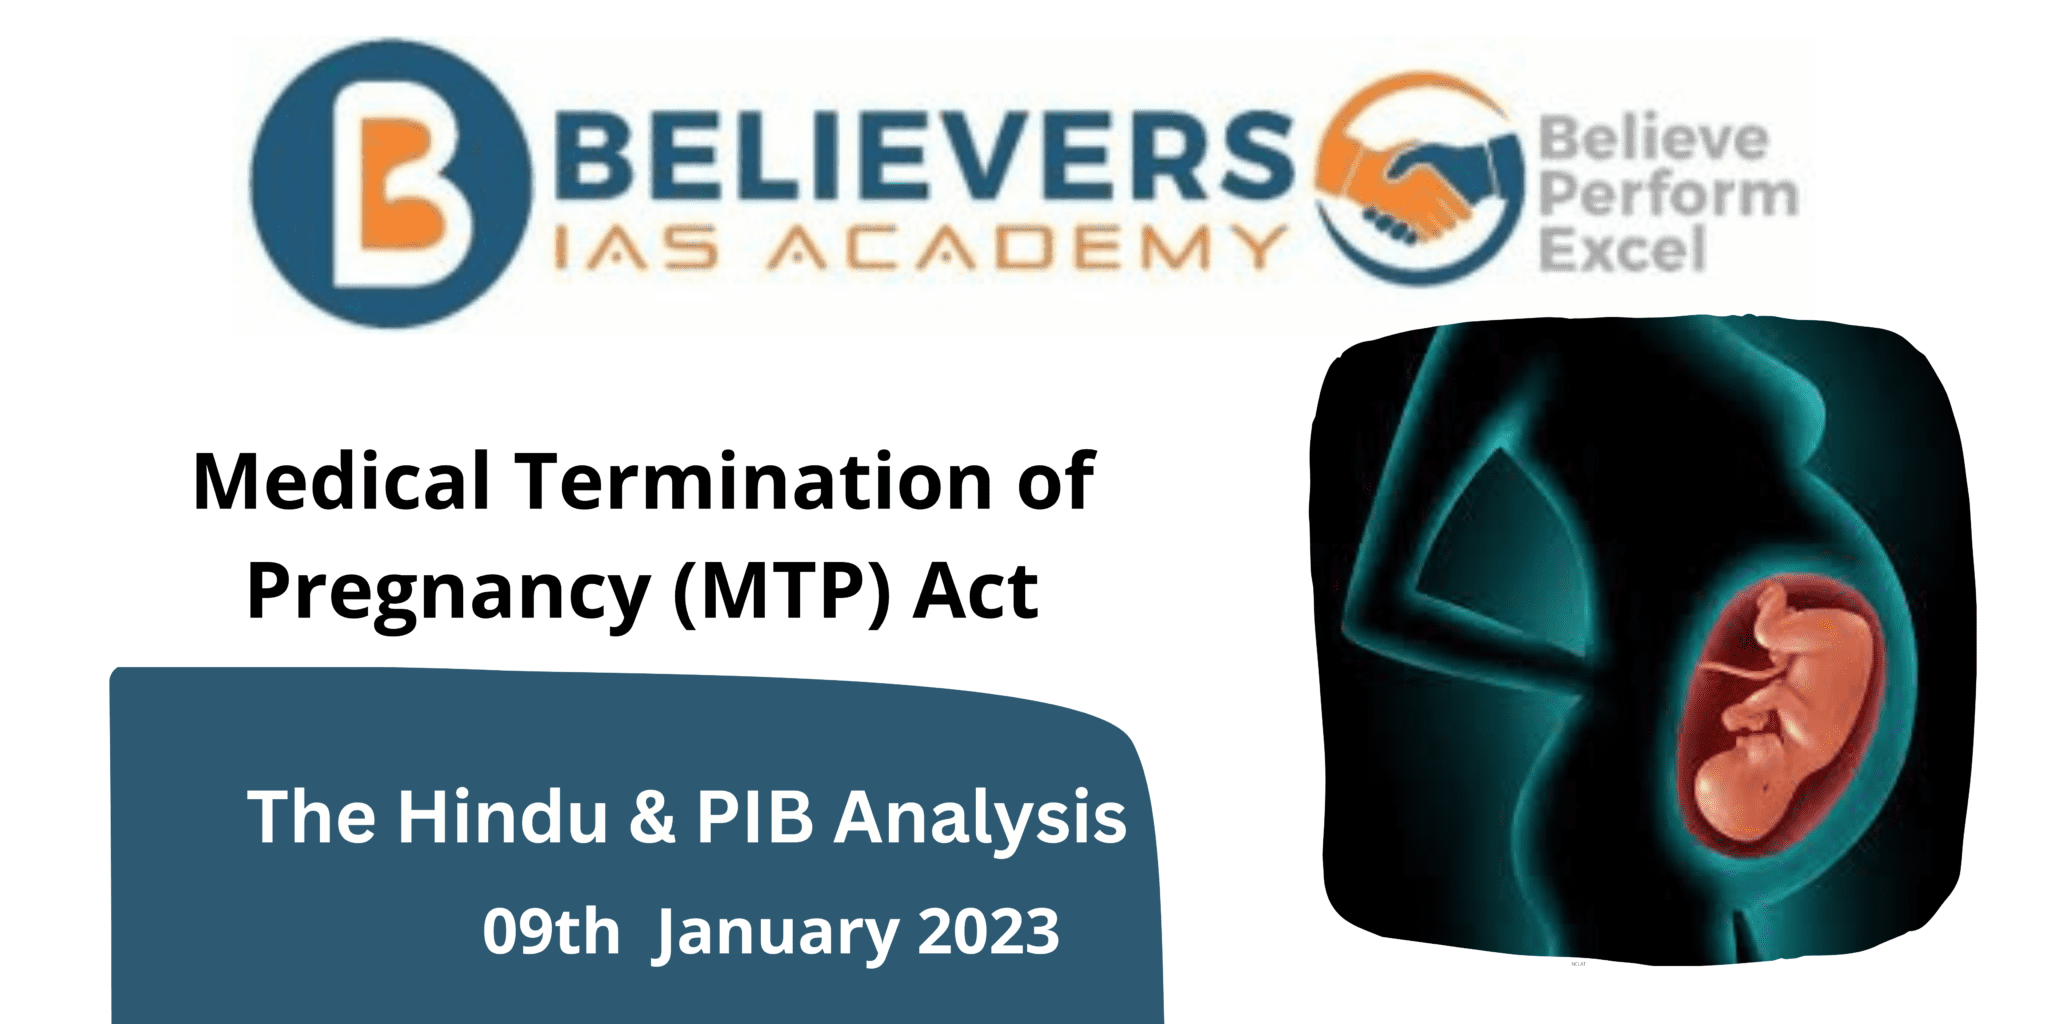 Medical Termination of Pregnancy Act Believers IAS Academy